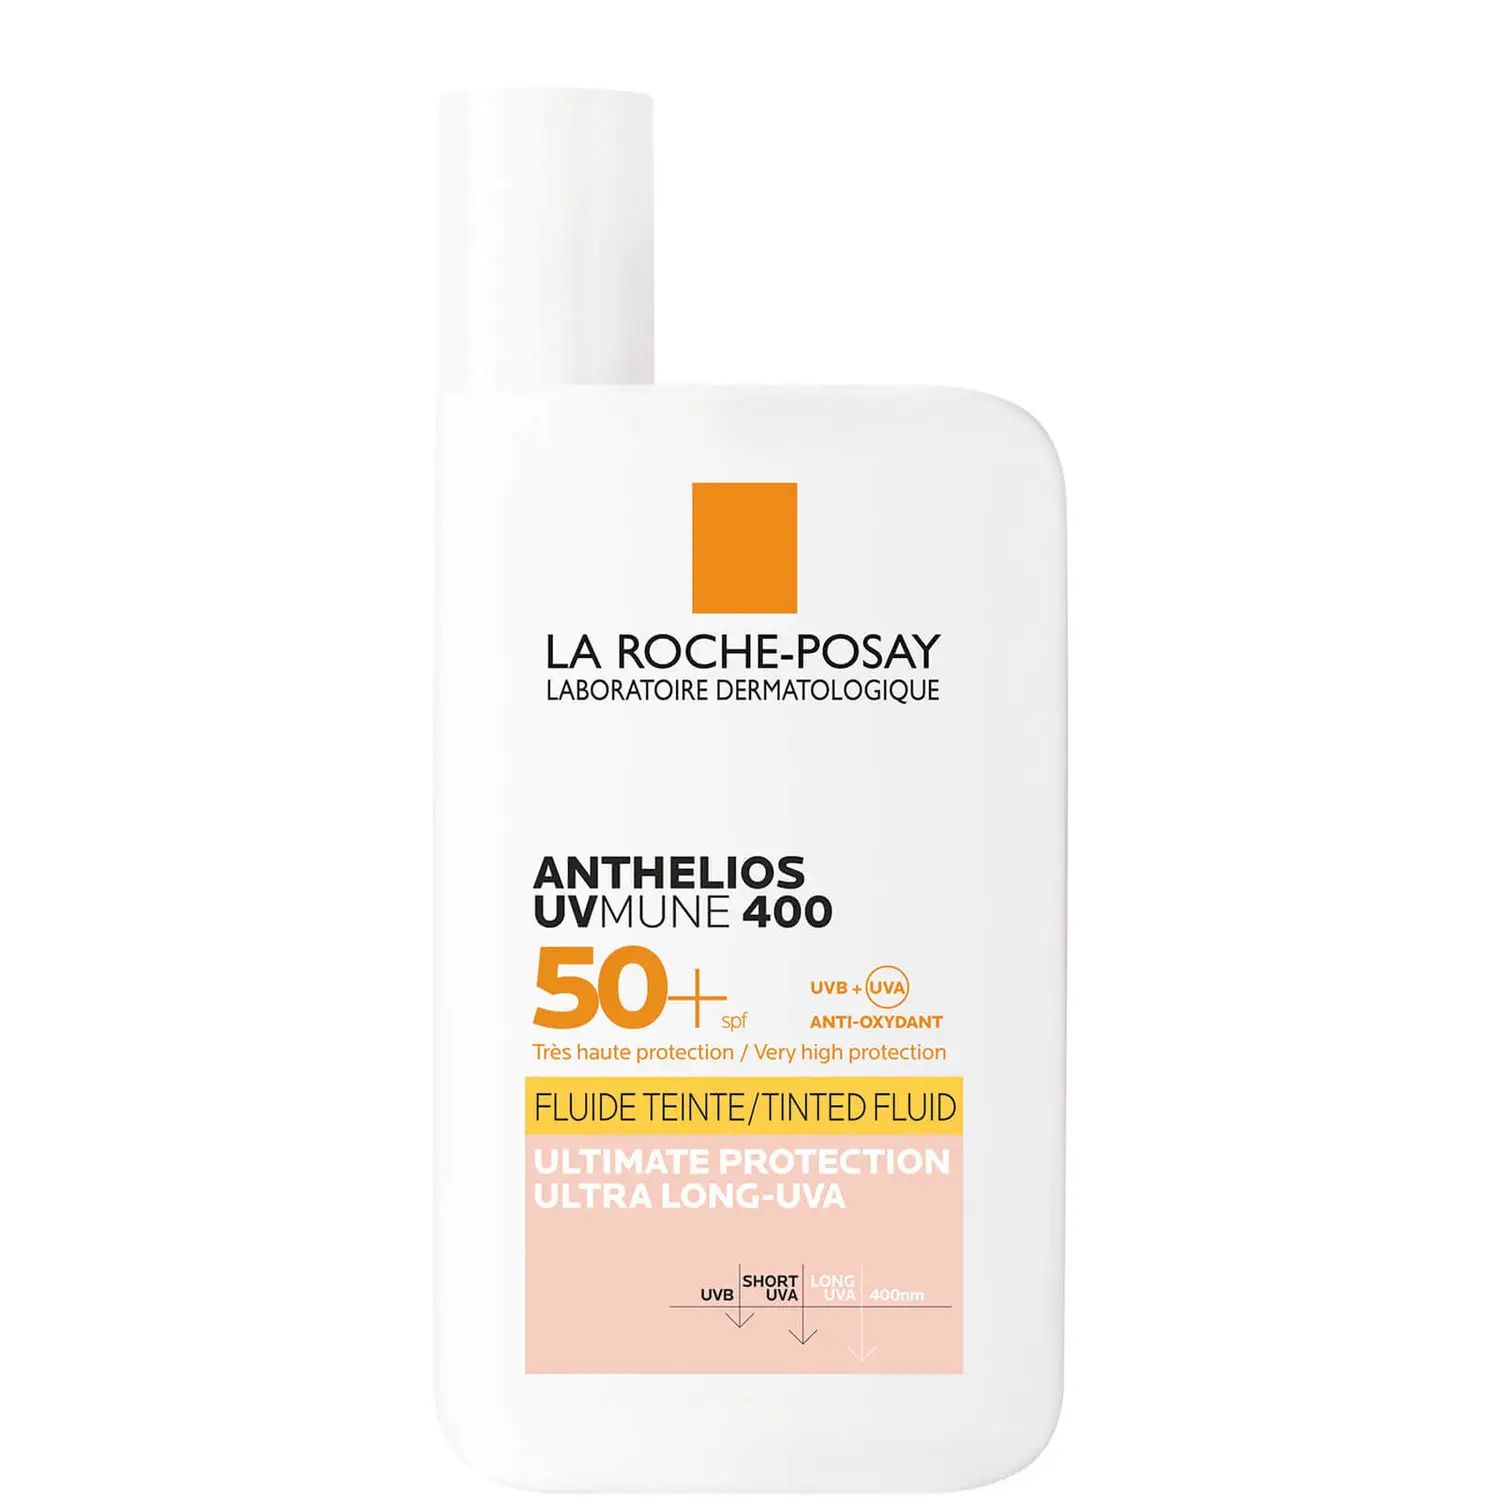 La Roche-Posay Anthelios UVMune 400 Invisible Fluid Tinted SPF50+ 50ml | Cult Beauty